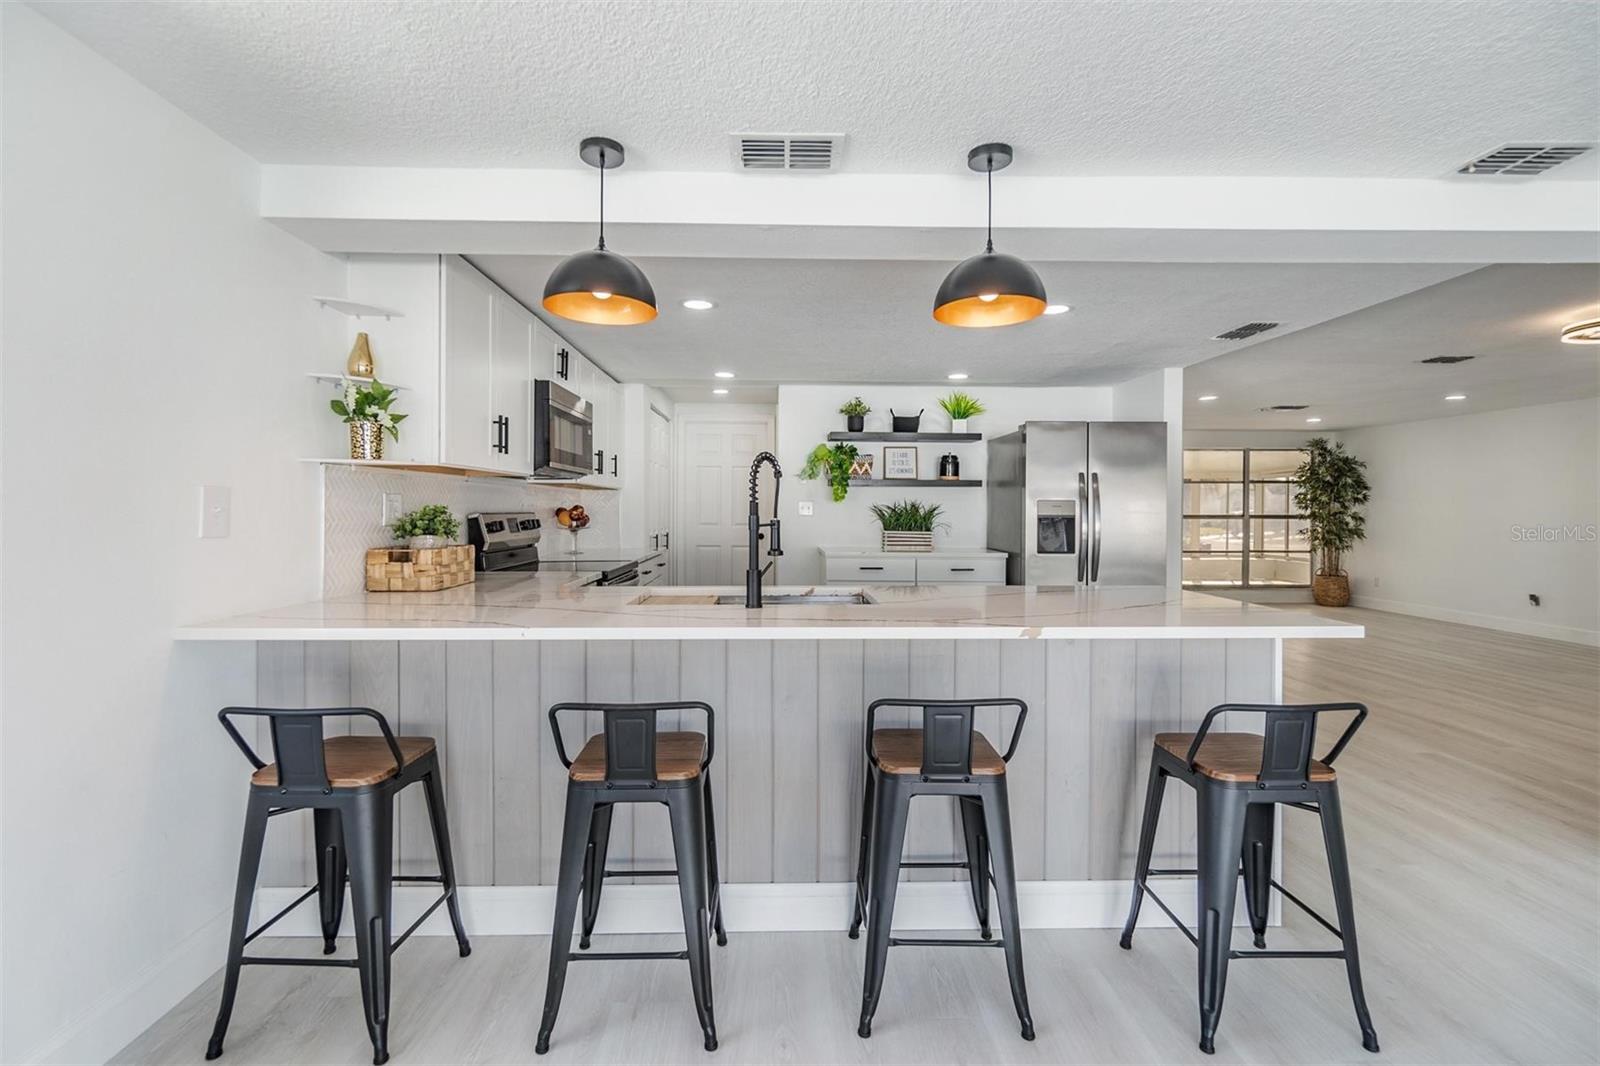 All new renovated kitchen. Luxury vinyl plank flooring, commercial faucet, gourmet sink, quartz countertops, shaker cabinets, stylish shelving, new hardware, can lights and pendulum lights above 10-feet bar